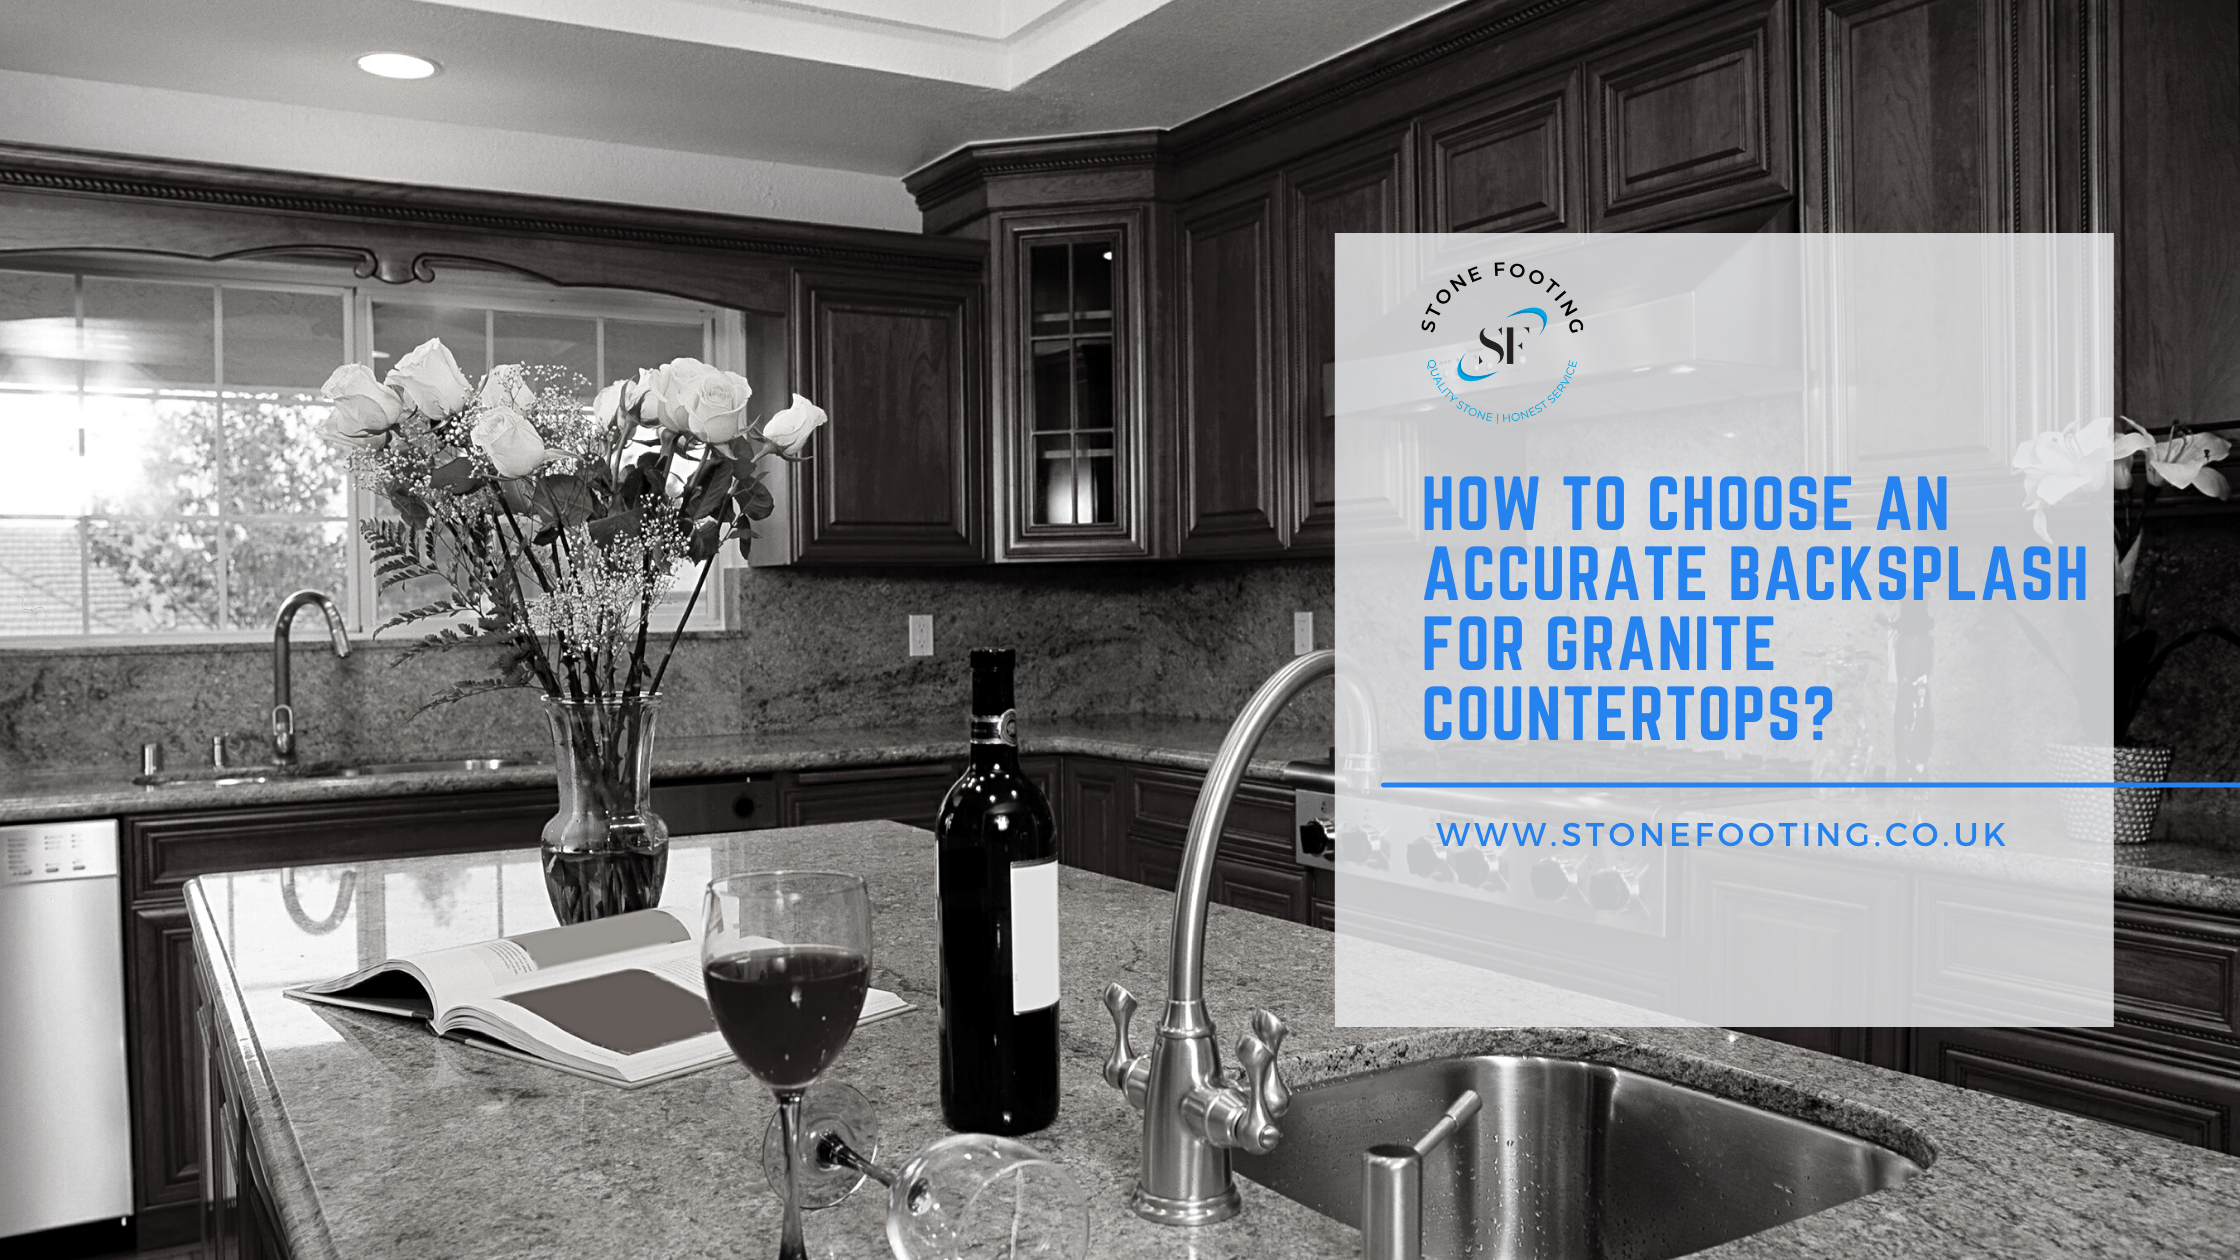 How To Choose An Accurate Backsplash For Granite Countertops?